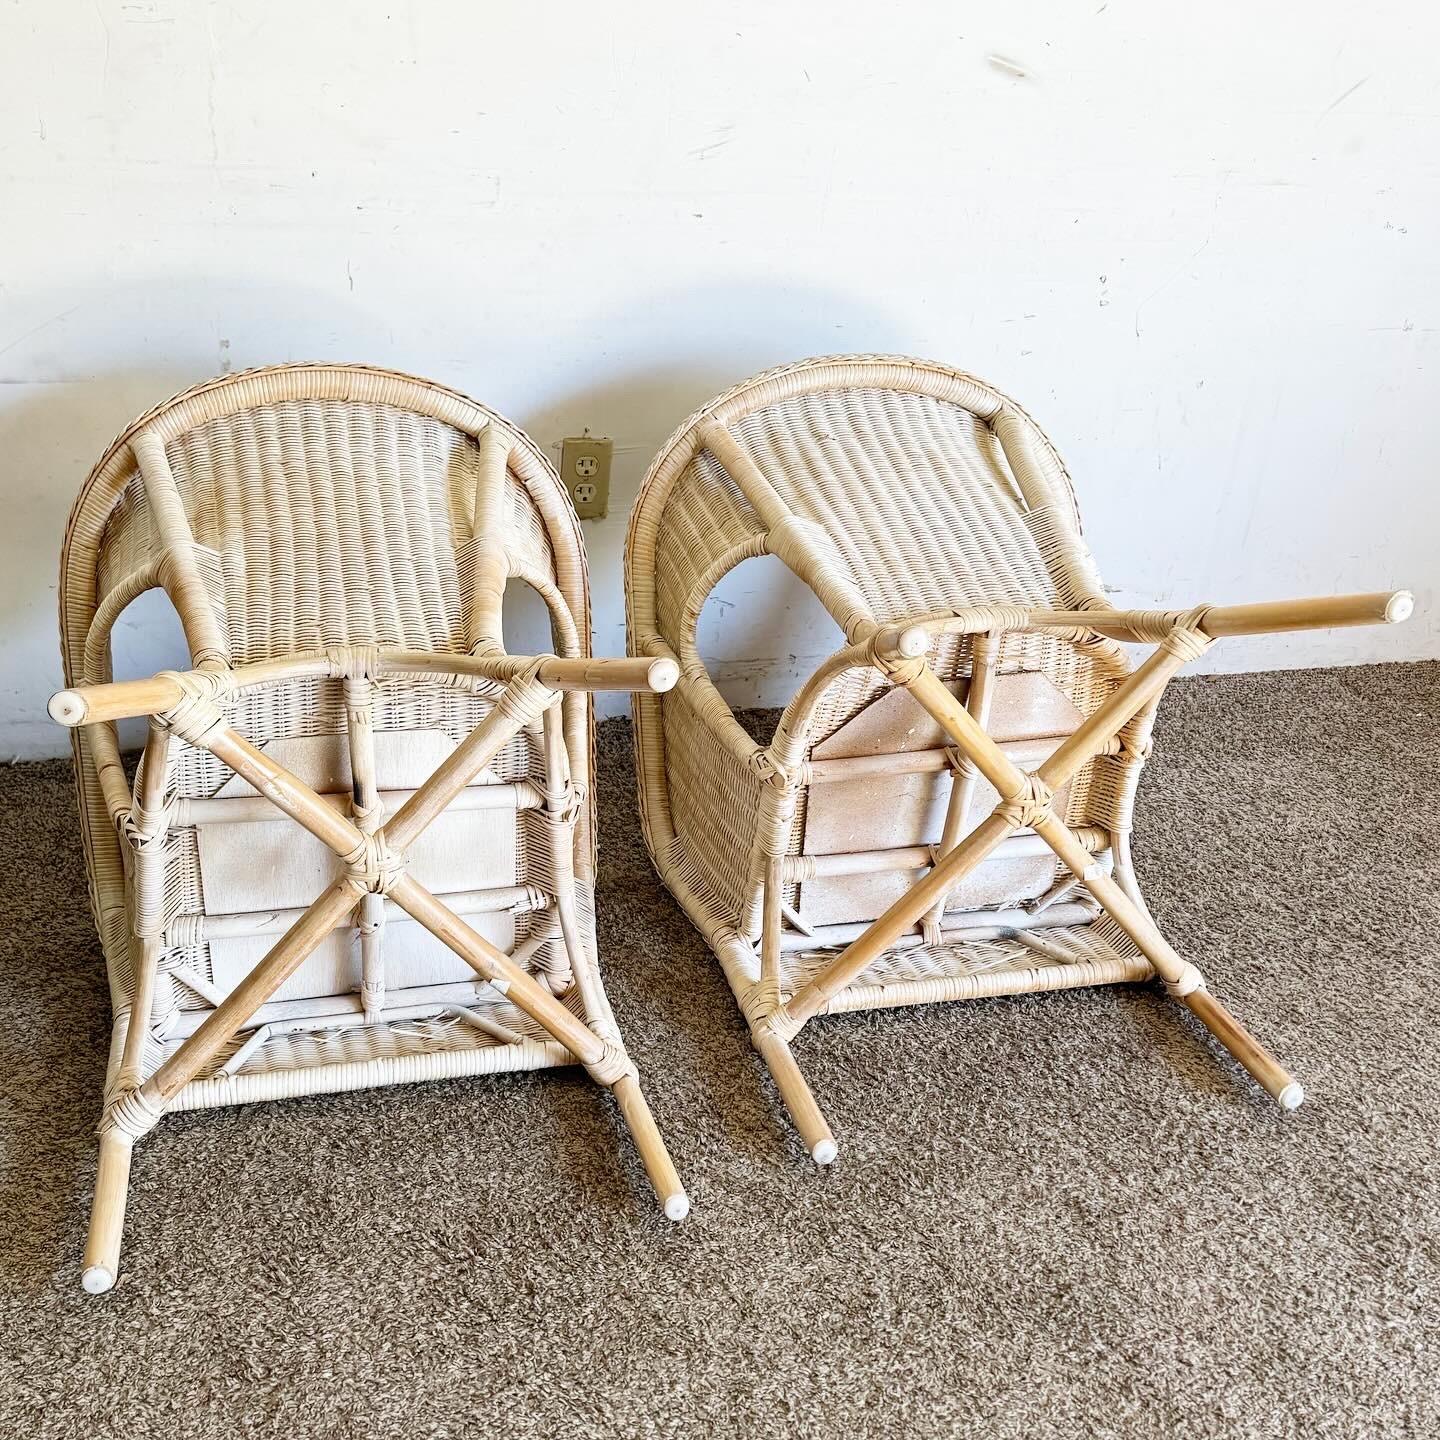 Add a touch of bohemian elegance with this pair of Boho Chic White Washed Wicker and Rattan Lounge Chairs. Perfect for sunrooms or patios, these chairs blend rustic charm with a breezy aesthetic, featuring an airy open weave and a comfortable design